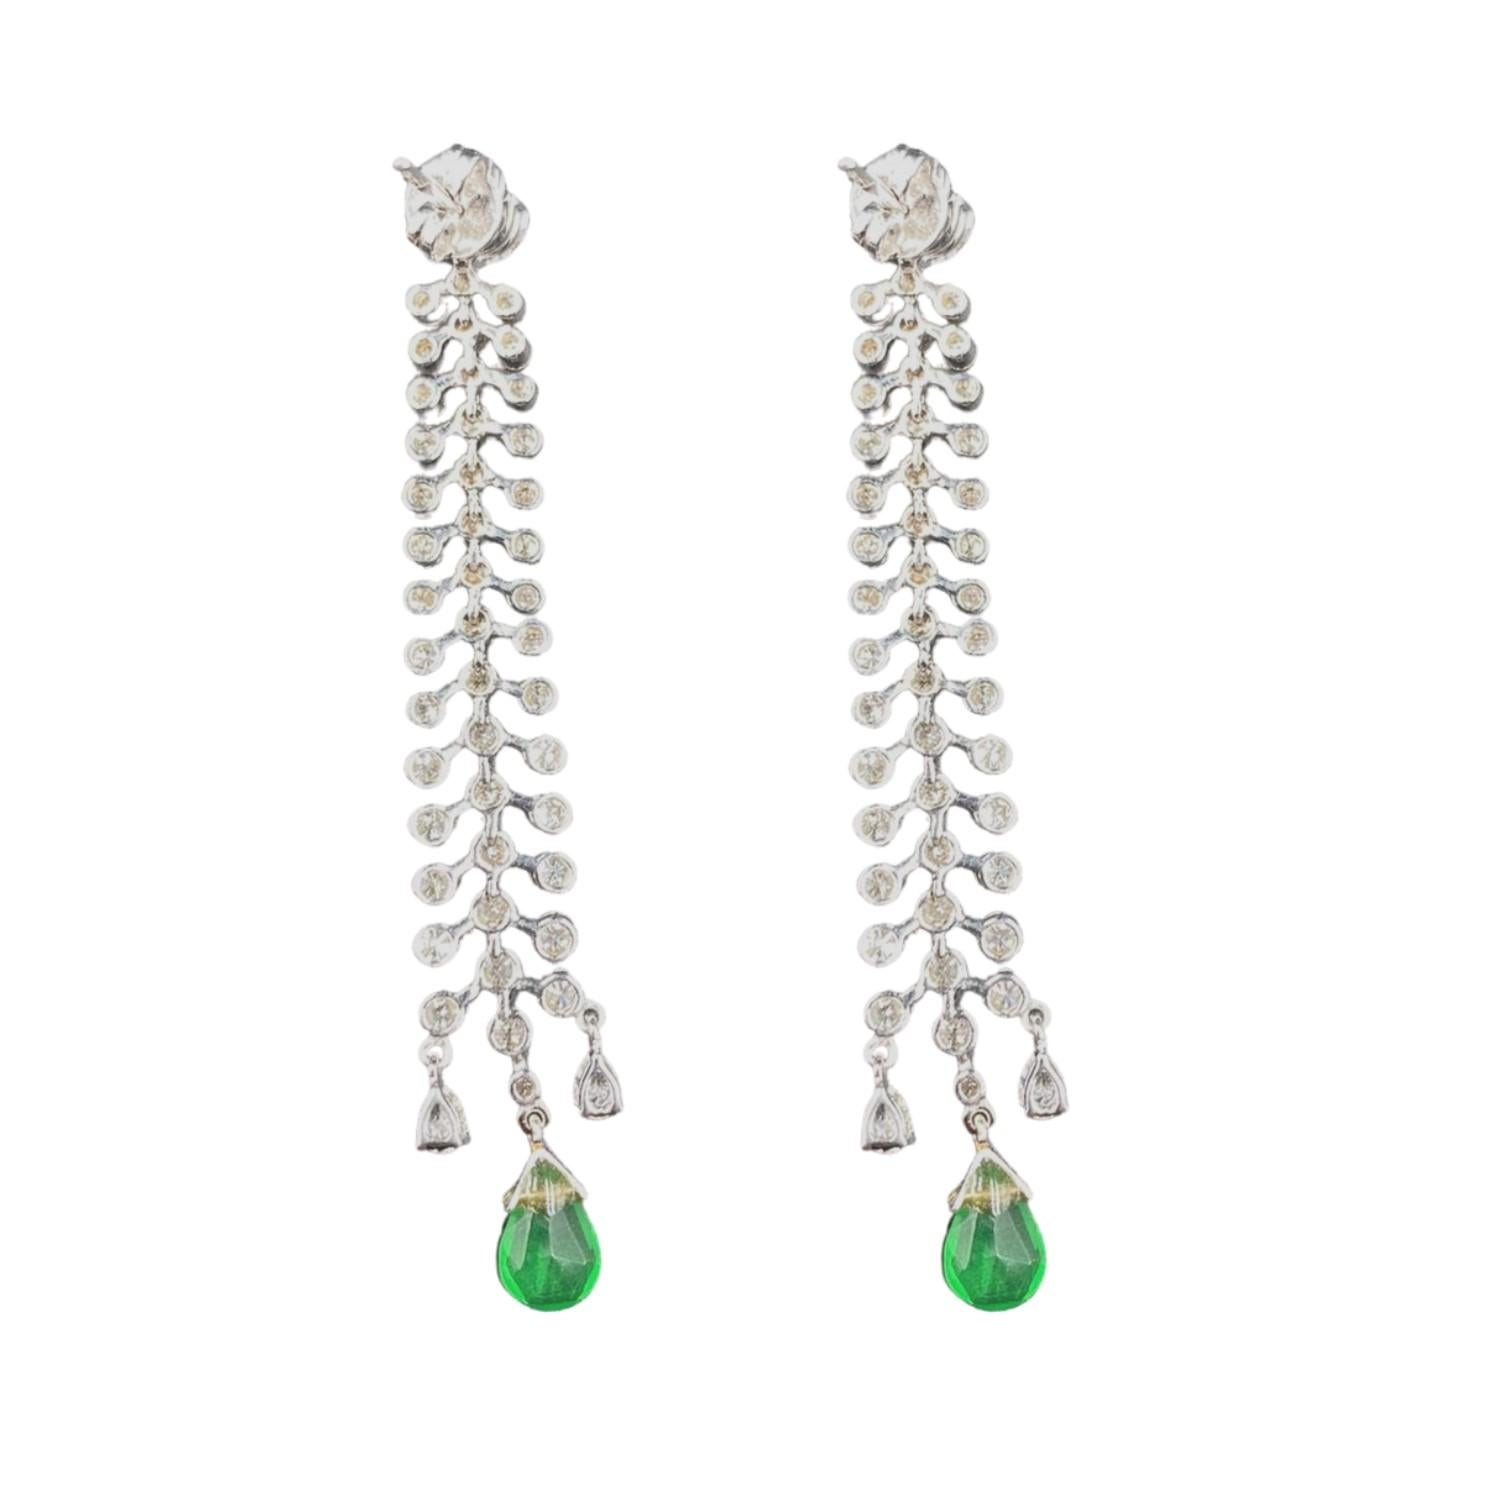 The Zamuri Earrings feature 3.64 carats of diamonds cascading effortlessly in a drop 2.29 carat natural emerald. 

Gems Stone Details
Round Brilliant Diamonds
Shape	Round
Color	G
Clarity 	VS1
Weight	3.64 carats 

Natural Emerald
Shape 	Pear Shaped